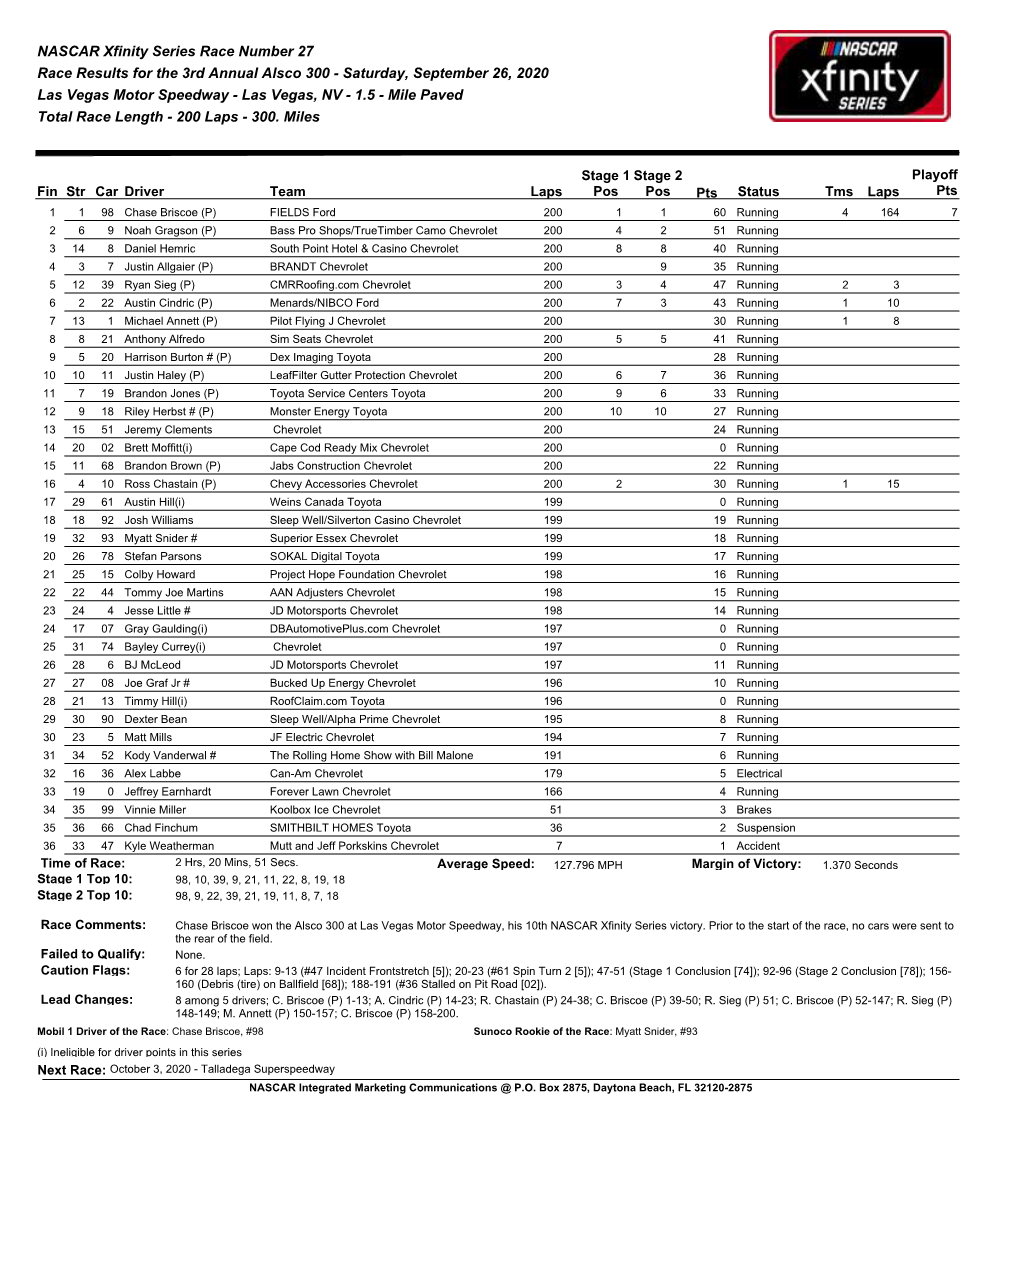 NASCAR Xfinity Series Race Number 27 Race Results for the 3Rd Annual